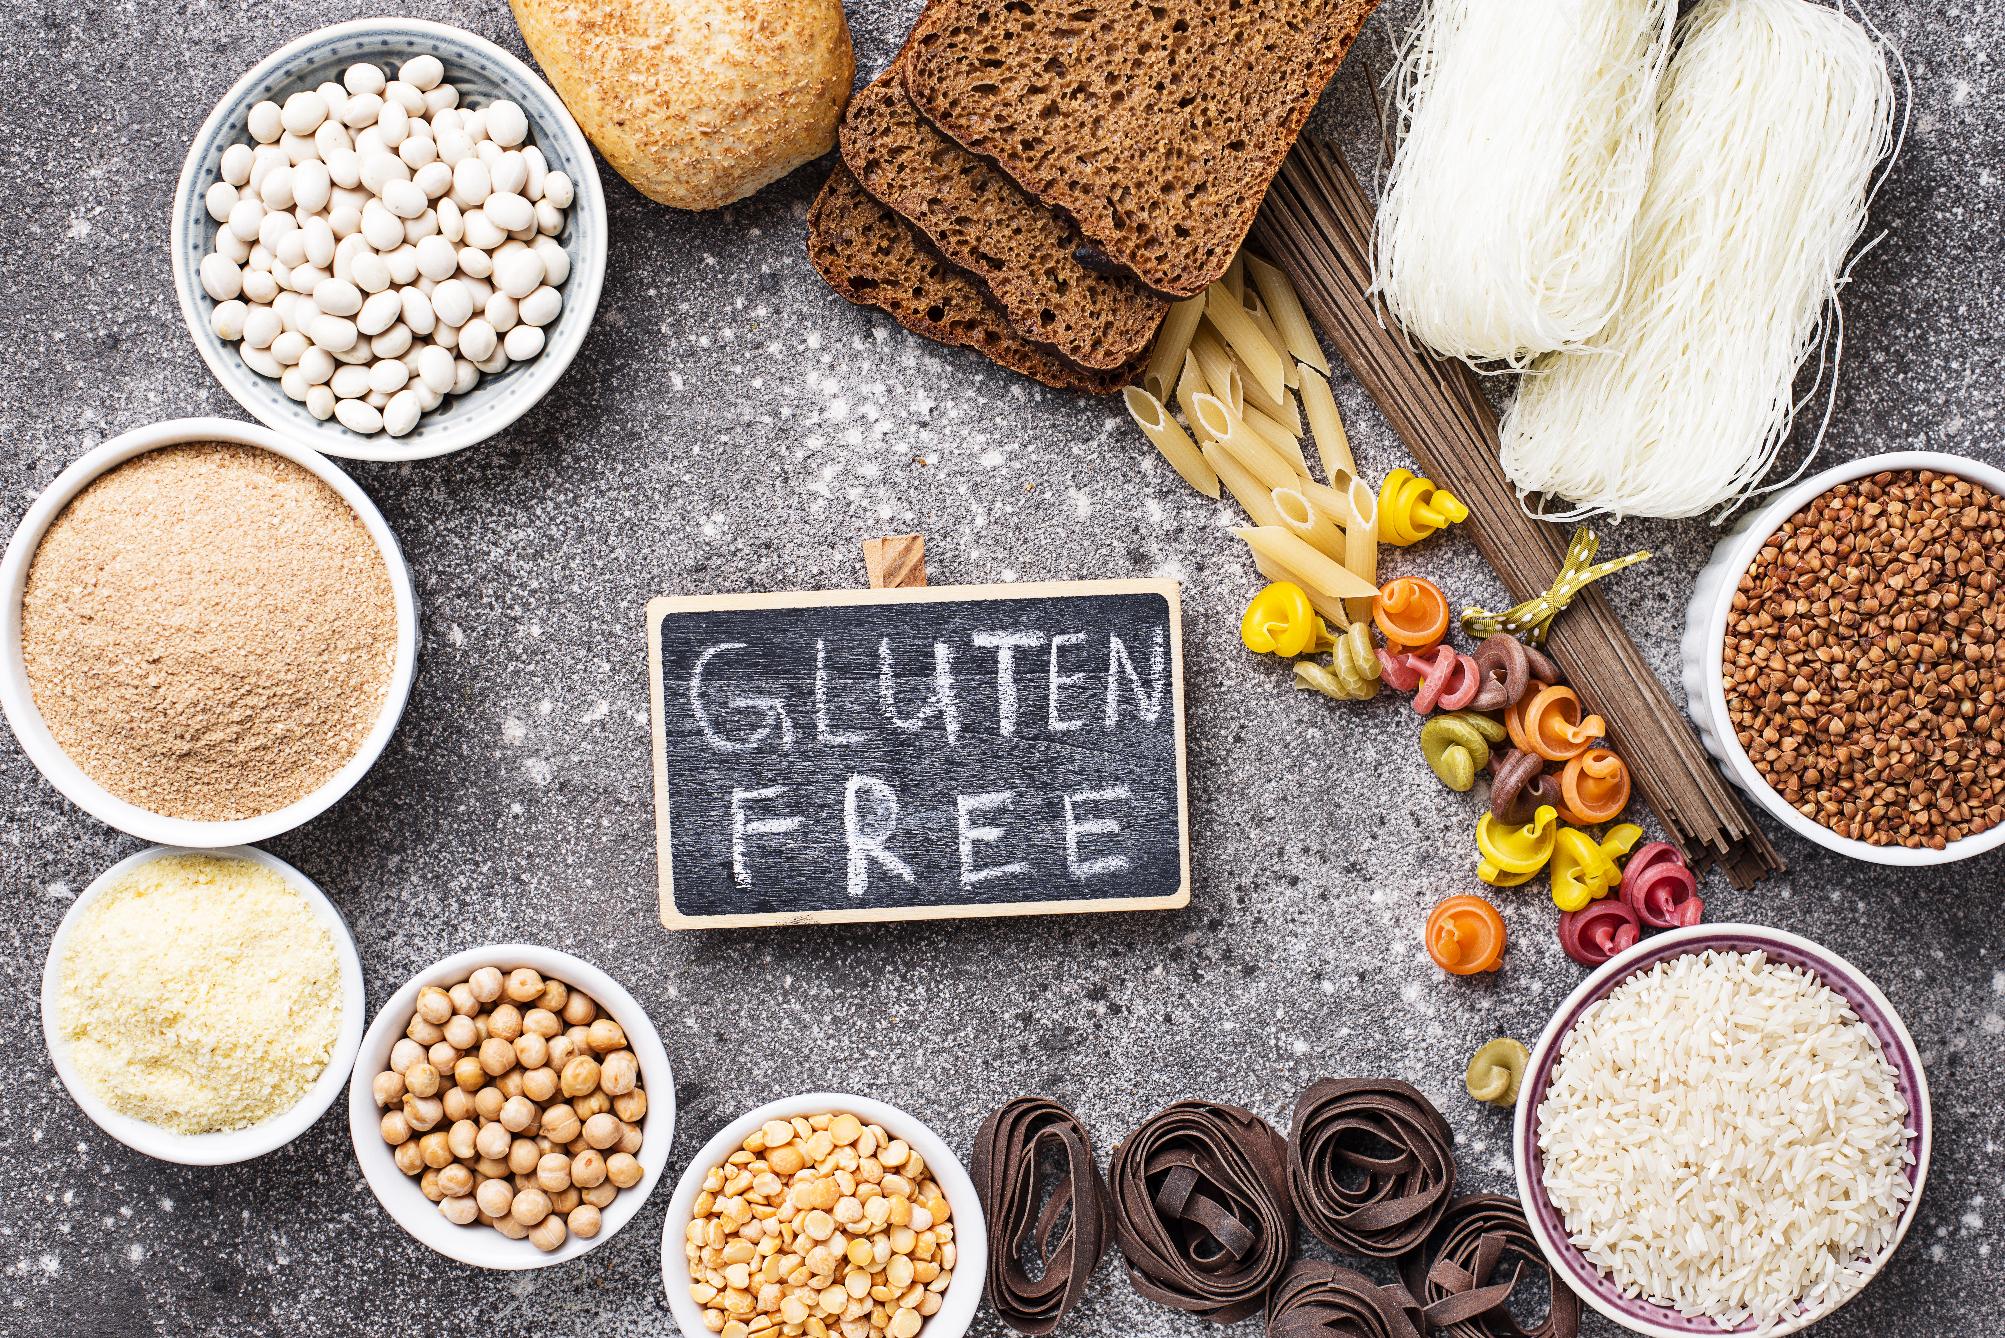 Gluten: What's the Story?